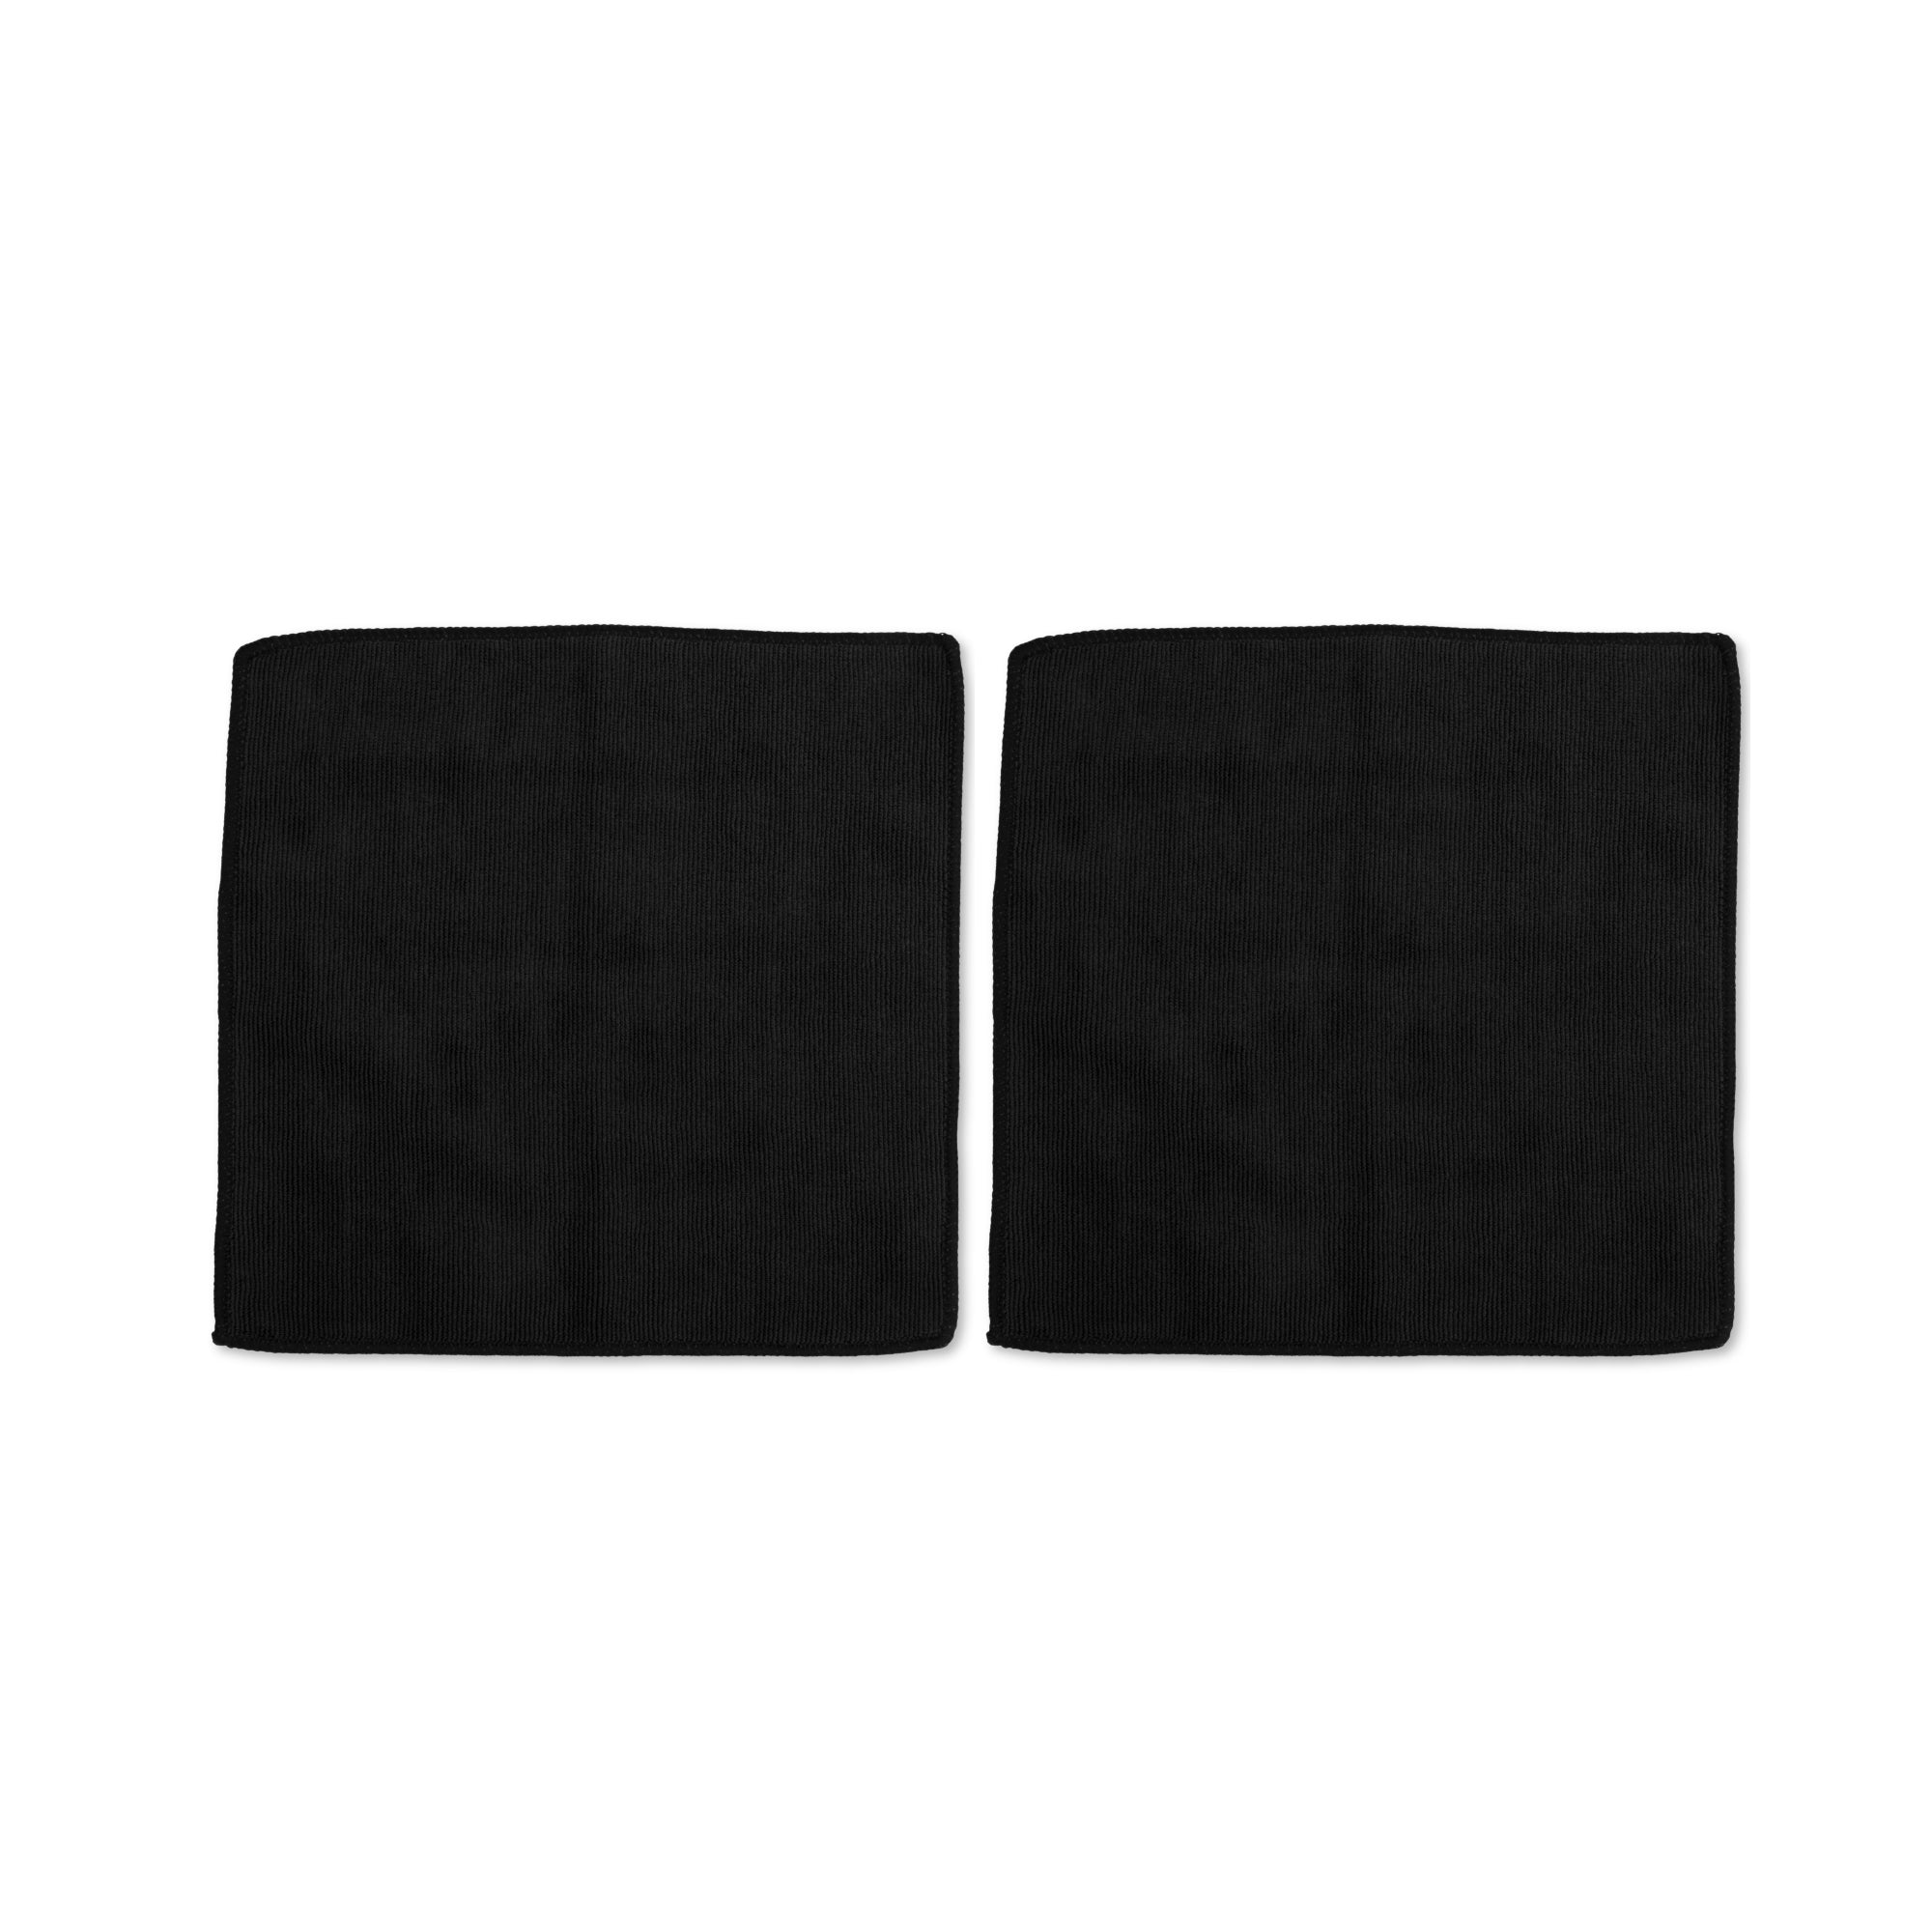  Espresso Barista Cleaning Towel Set for Steamer - Pack